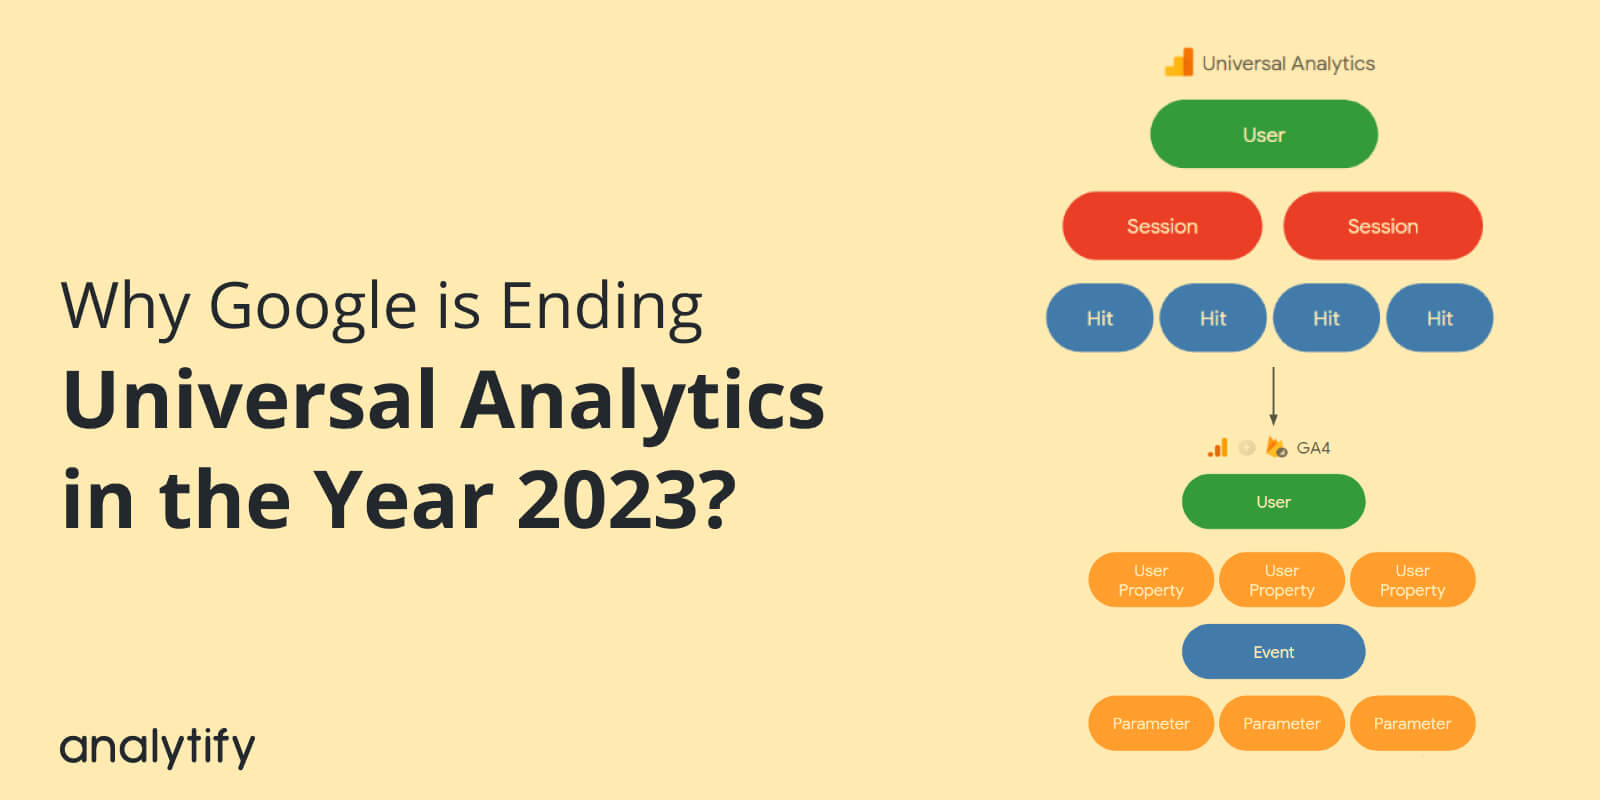 Why Google is Ending Universal Analytics